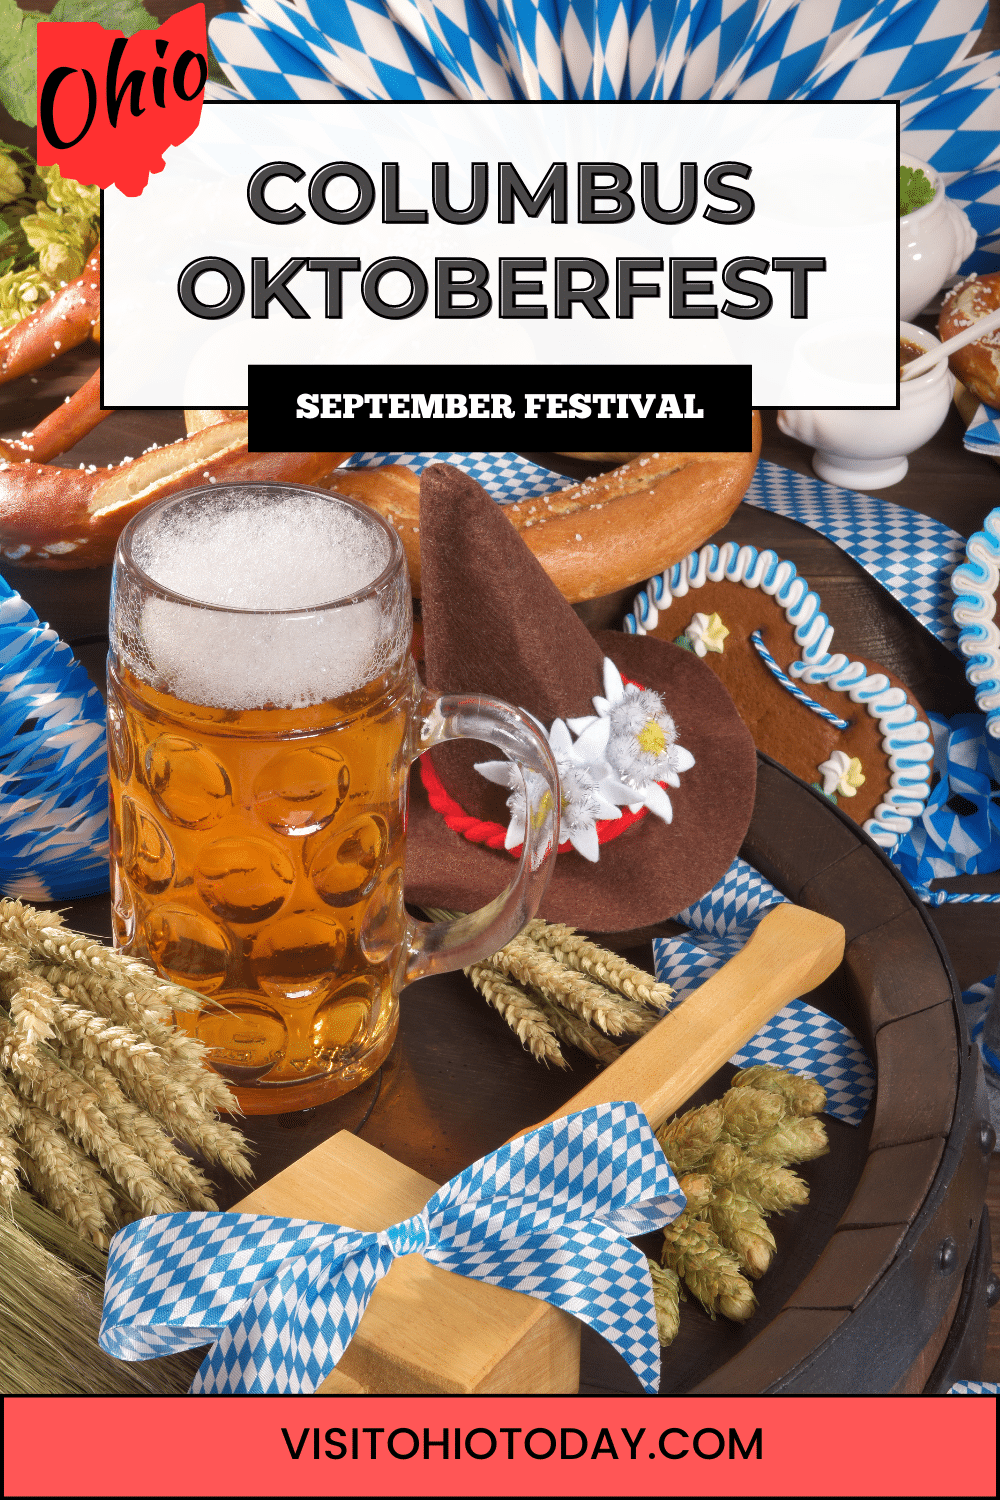 Schmidt's annual Columbus Oktoberfest German celebration takes place at the Expo Center from September 8 to 10, 2023. It mainly revolves around beer, but there's much more to enjoy here! For the kids, there are fun arts and crafts, inflatables, face painting, and other activities.